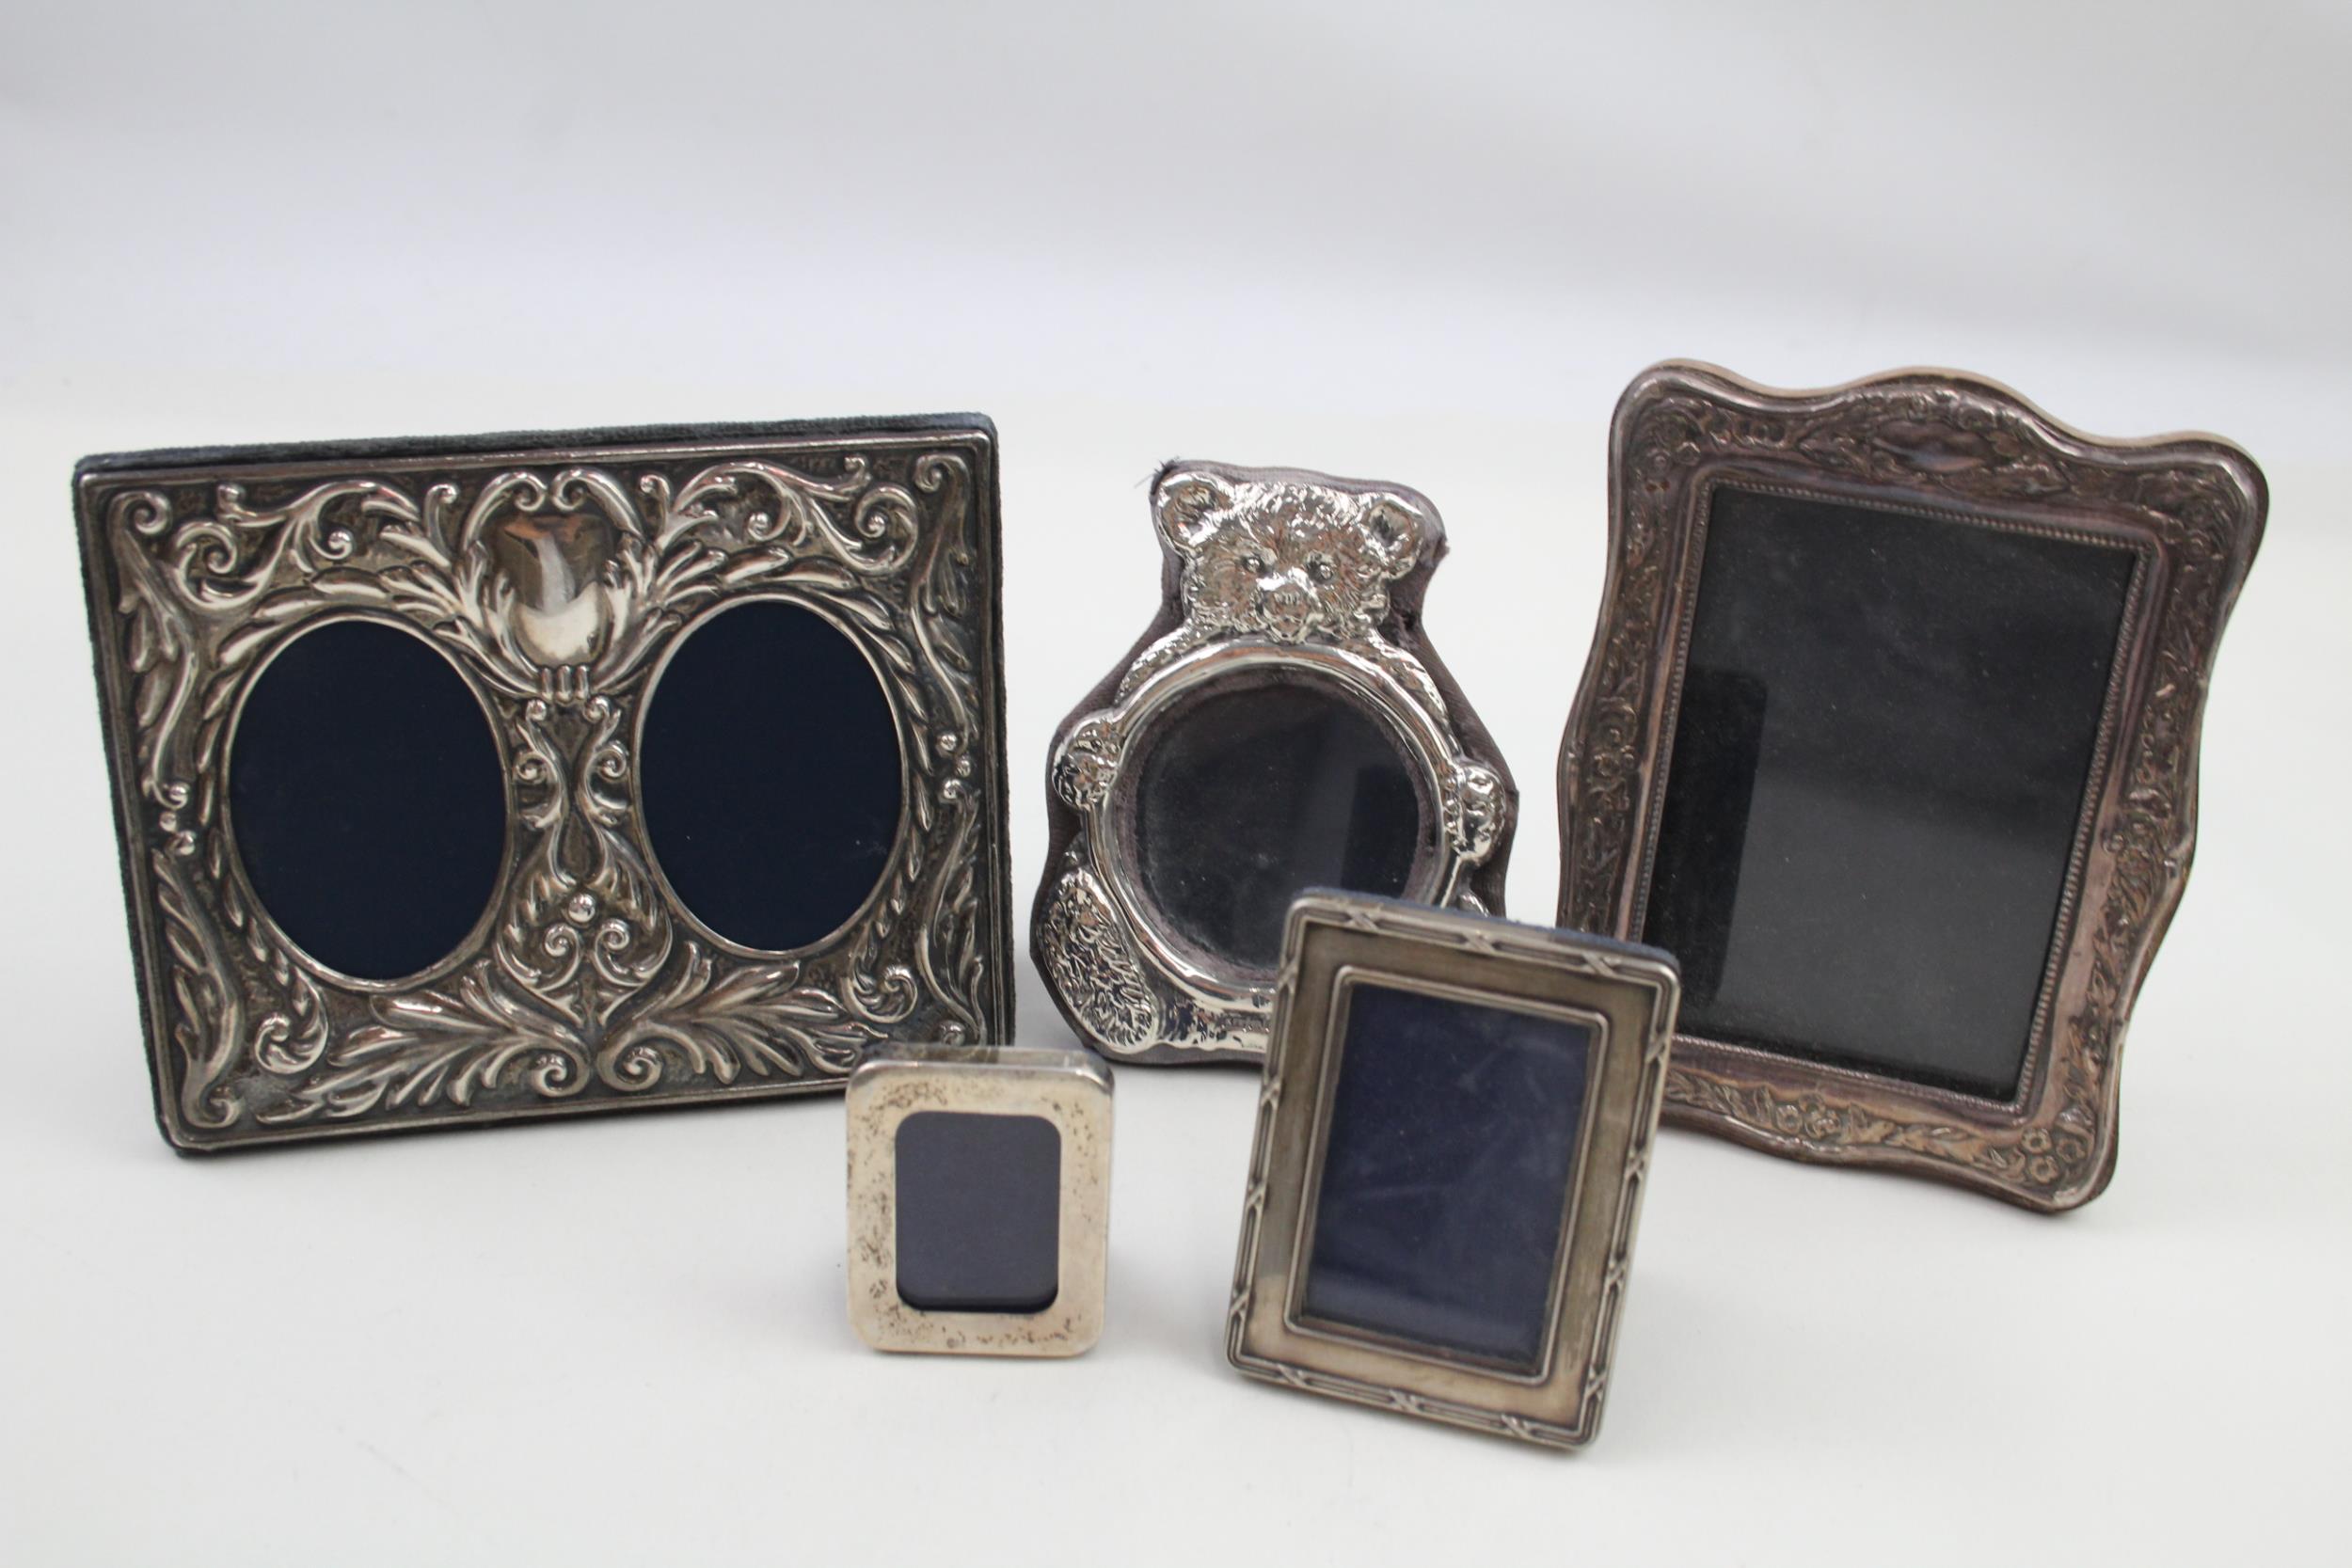 5 x Vintage Hallmarked .925 Sterling Silver Photograph Frames (323g) // In vintage condition Signs